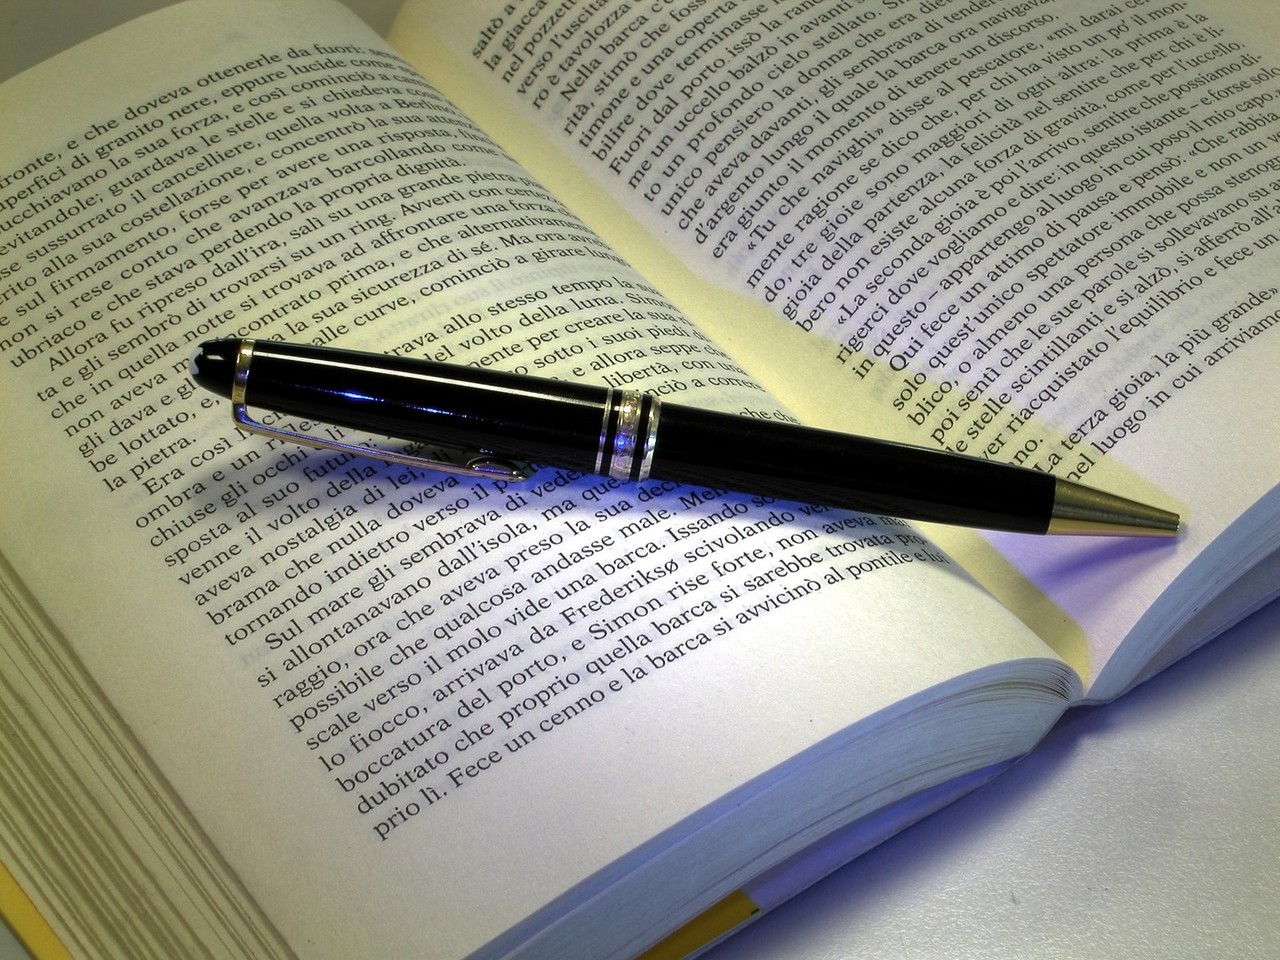 Picture of a pen on a book